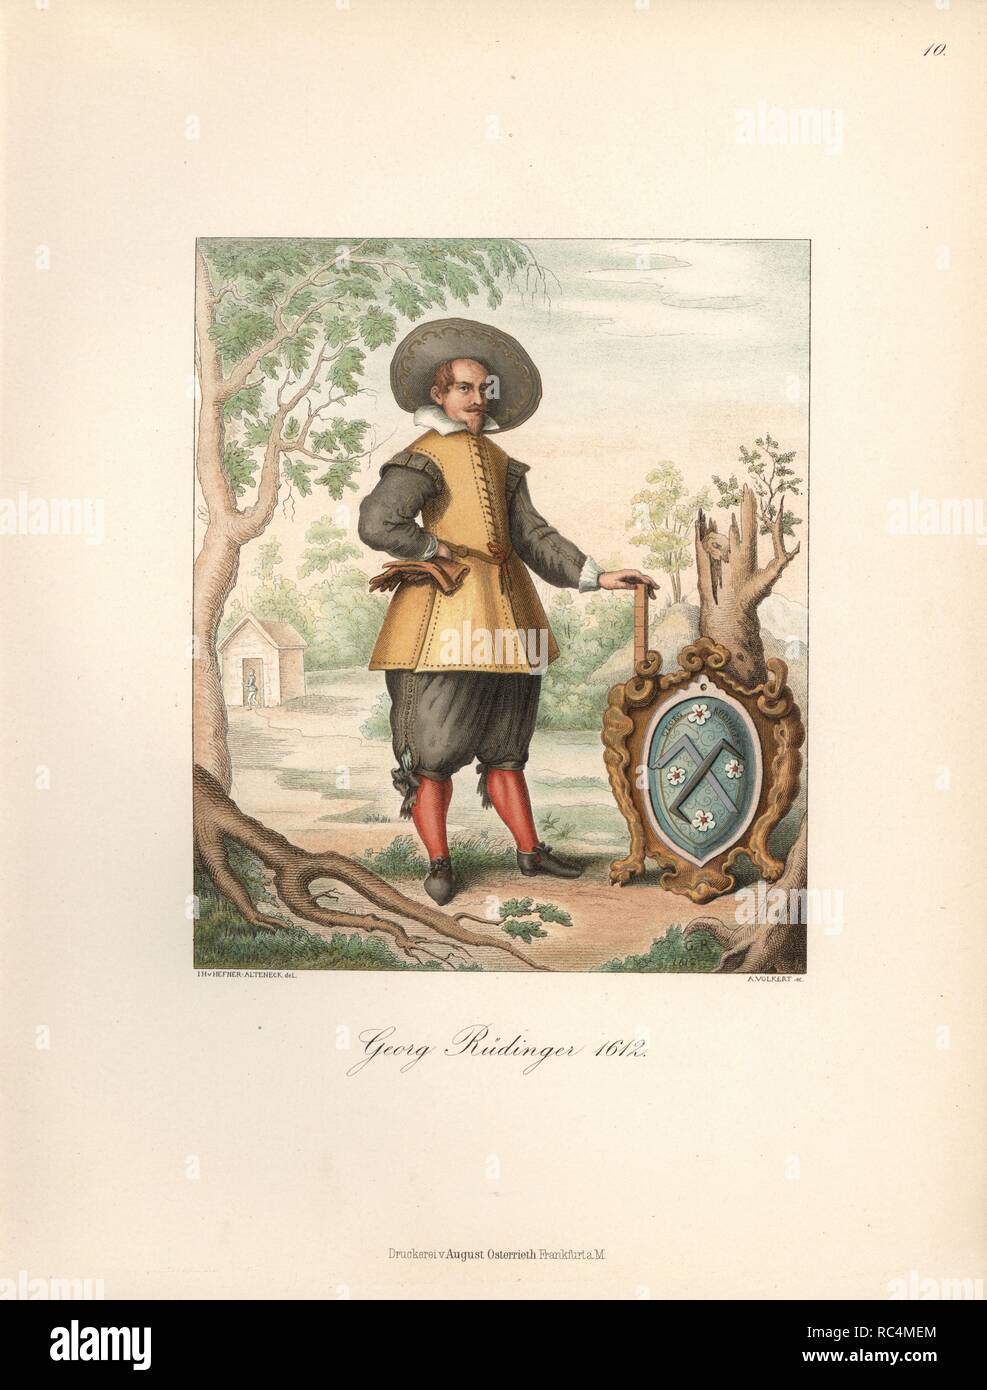 Portrait of architect Georg Rudinger in 1612 with a ruler and his coat of arms featuring instruments of his trade. Chromolithograph from Hefner-Alteneck's 'Costumes, Artworks and Appliances from the Middle Ages to the 17th Century,' Frankfurt, 1889. Illustration by Dr. Jakob Heinrich von Hefner-Alteneck, lithographed by A. Volkert, and published by Heinrich Keller. Dr. Hefner-Alteneck (1811 - 1903) was a German curator, archaeologist, art historian, illustrator and etcher. Stock Photo